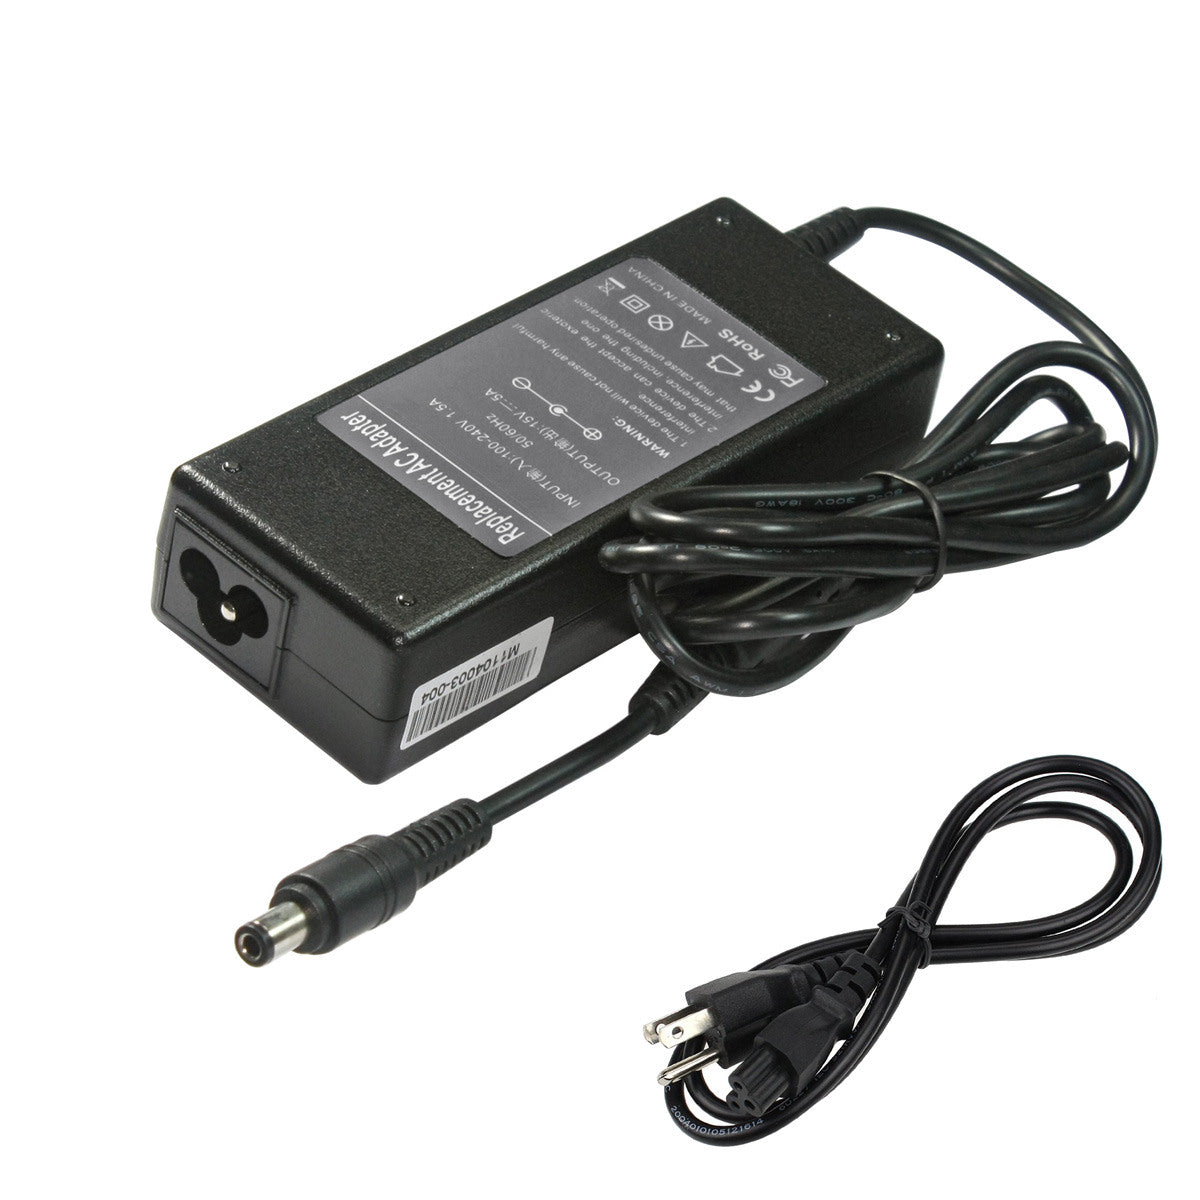 Compatible Replacement Toshiba Satellite M55-S329 AC Adapter 75Watt 15V 5A.